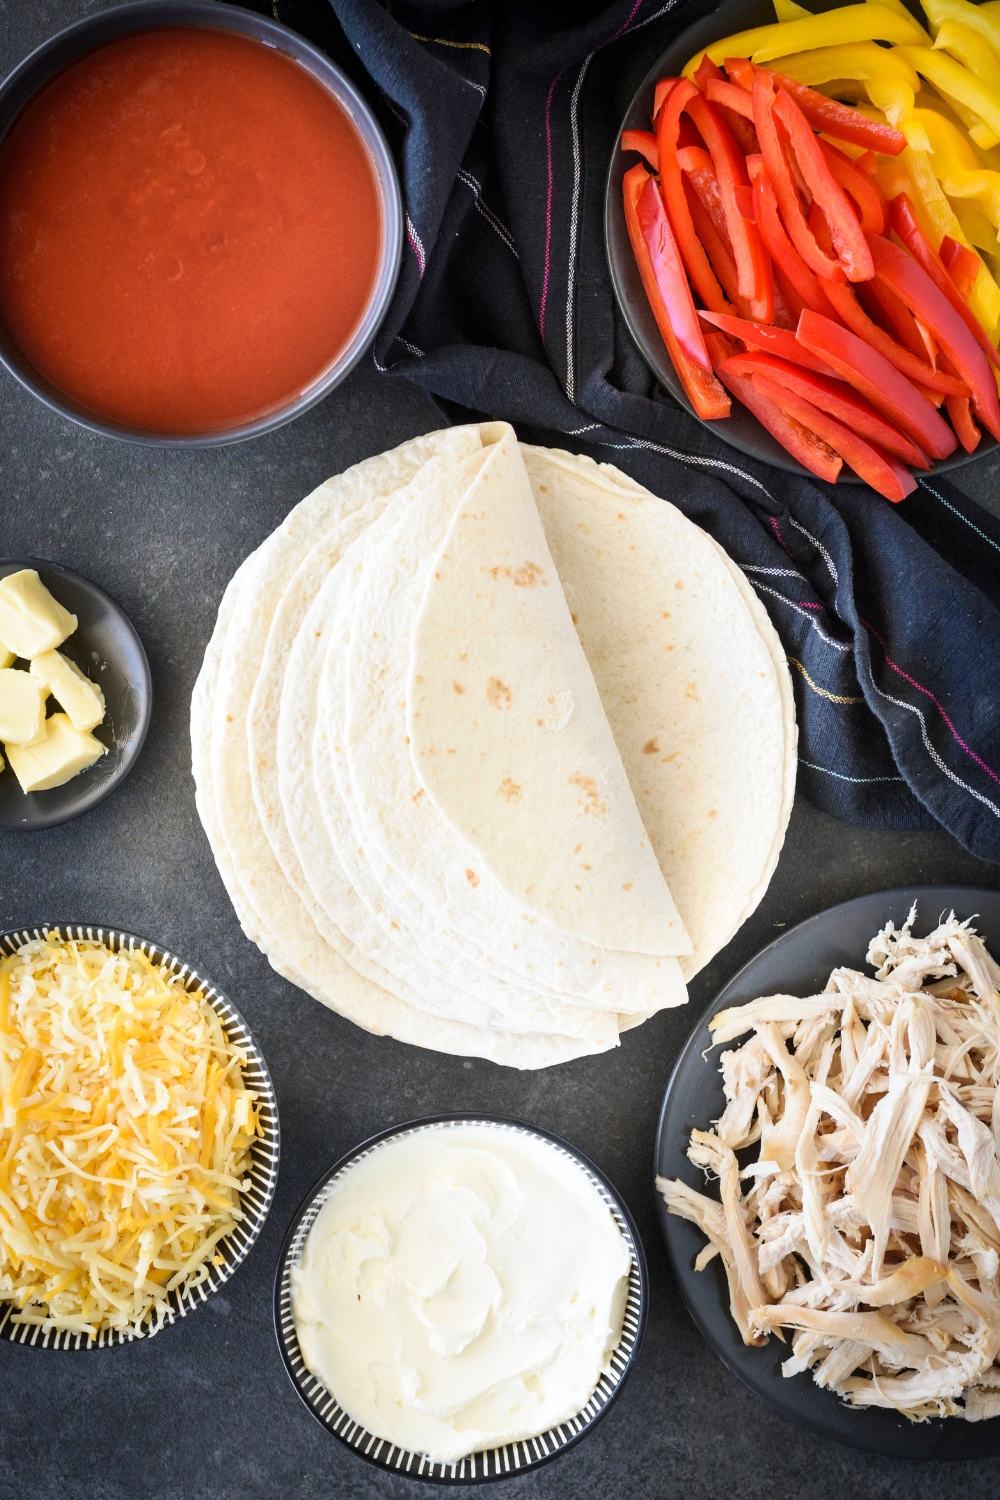 An assortment of ingredients including a pile of flour tortillas surrounded by bowls of enchilada sauce, shredded chicken, shredded cheese, cream cheese, and sliced bell peppers.